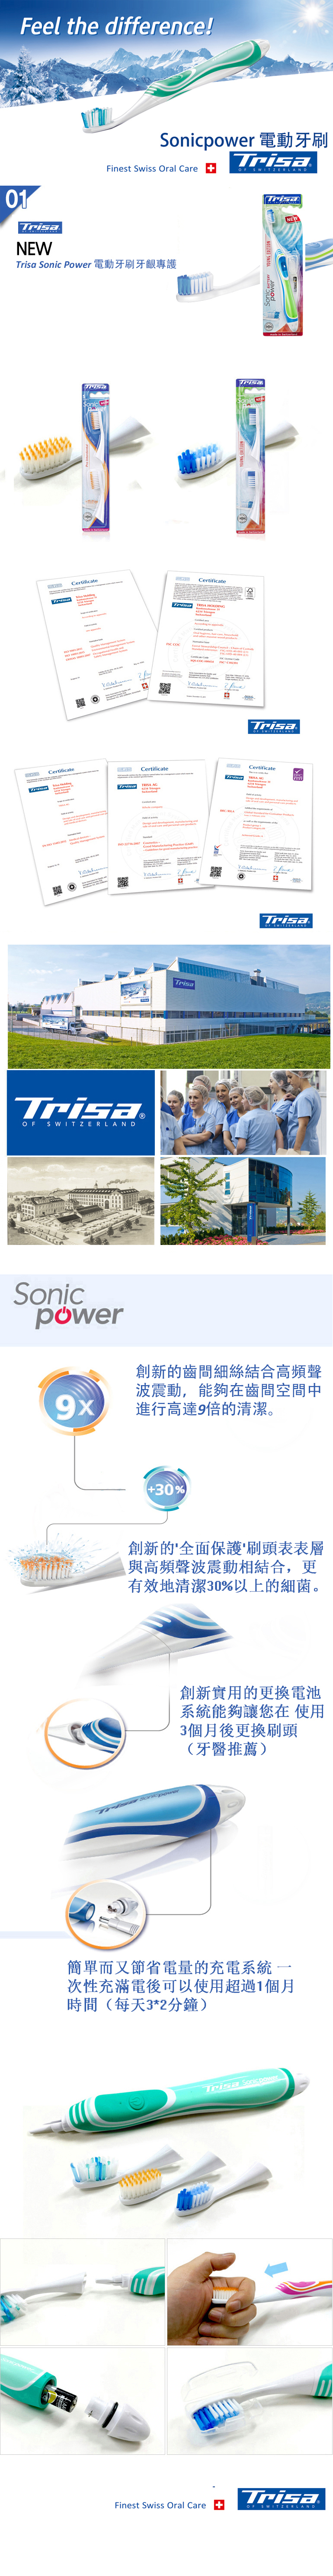 hk-11-sonicpower-battery-young.jpg